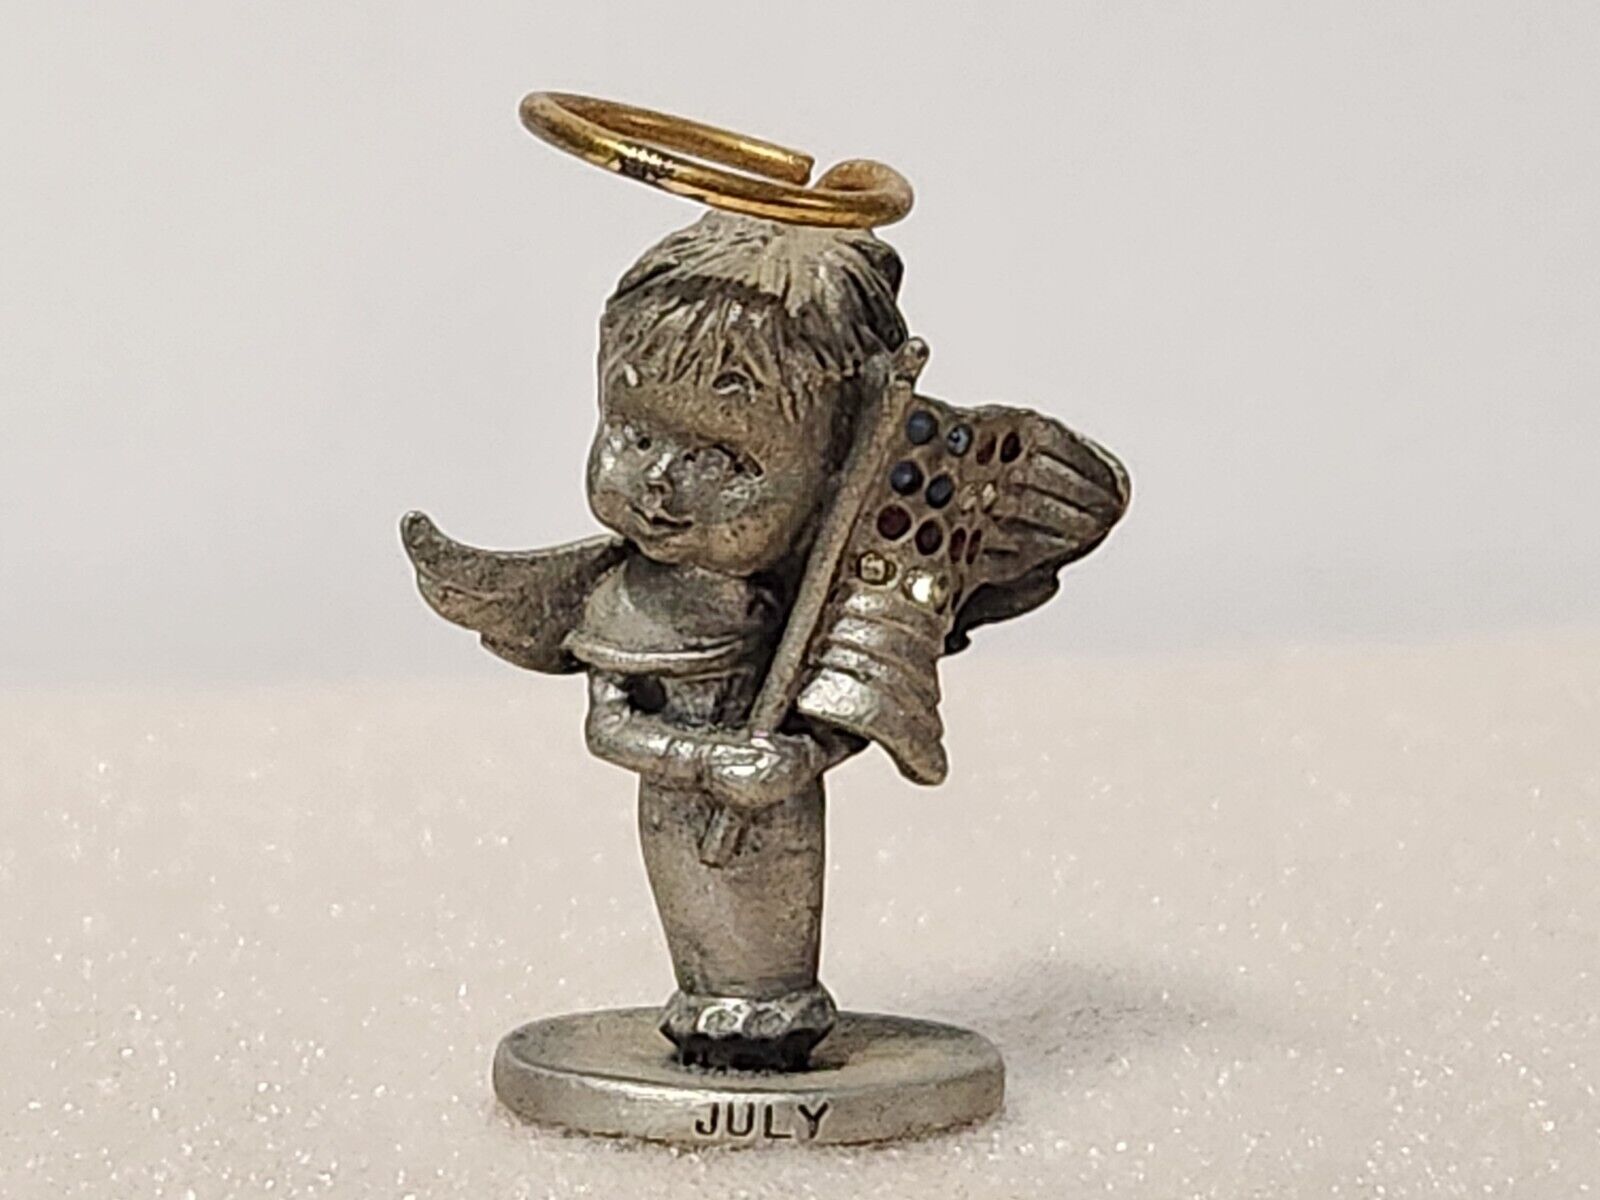 VINTAGE L'IL ANGELS BY CATHEDRAL GENUINE FINE PEWTER JULY MINIATURE ANGEL FIGURE